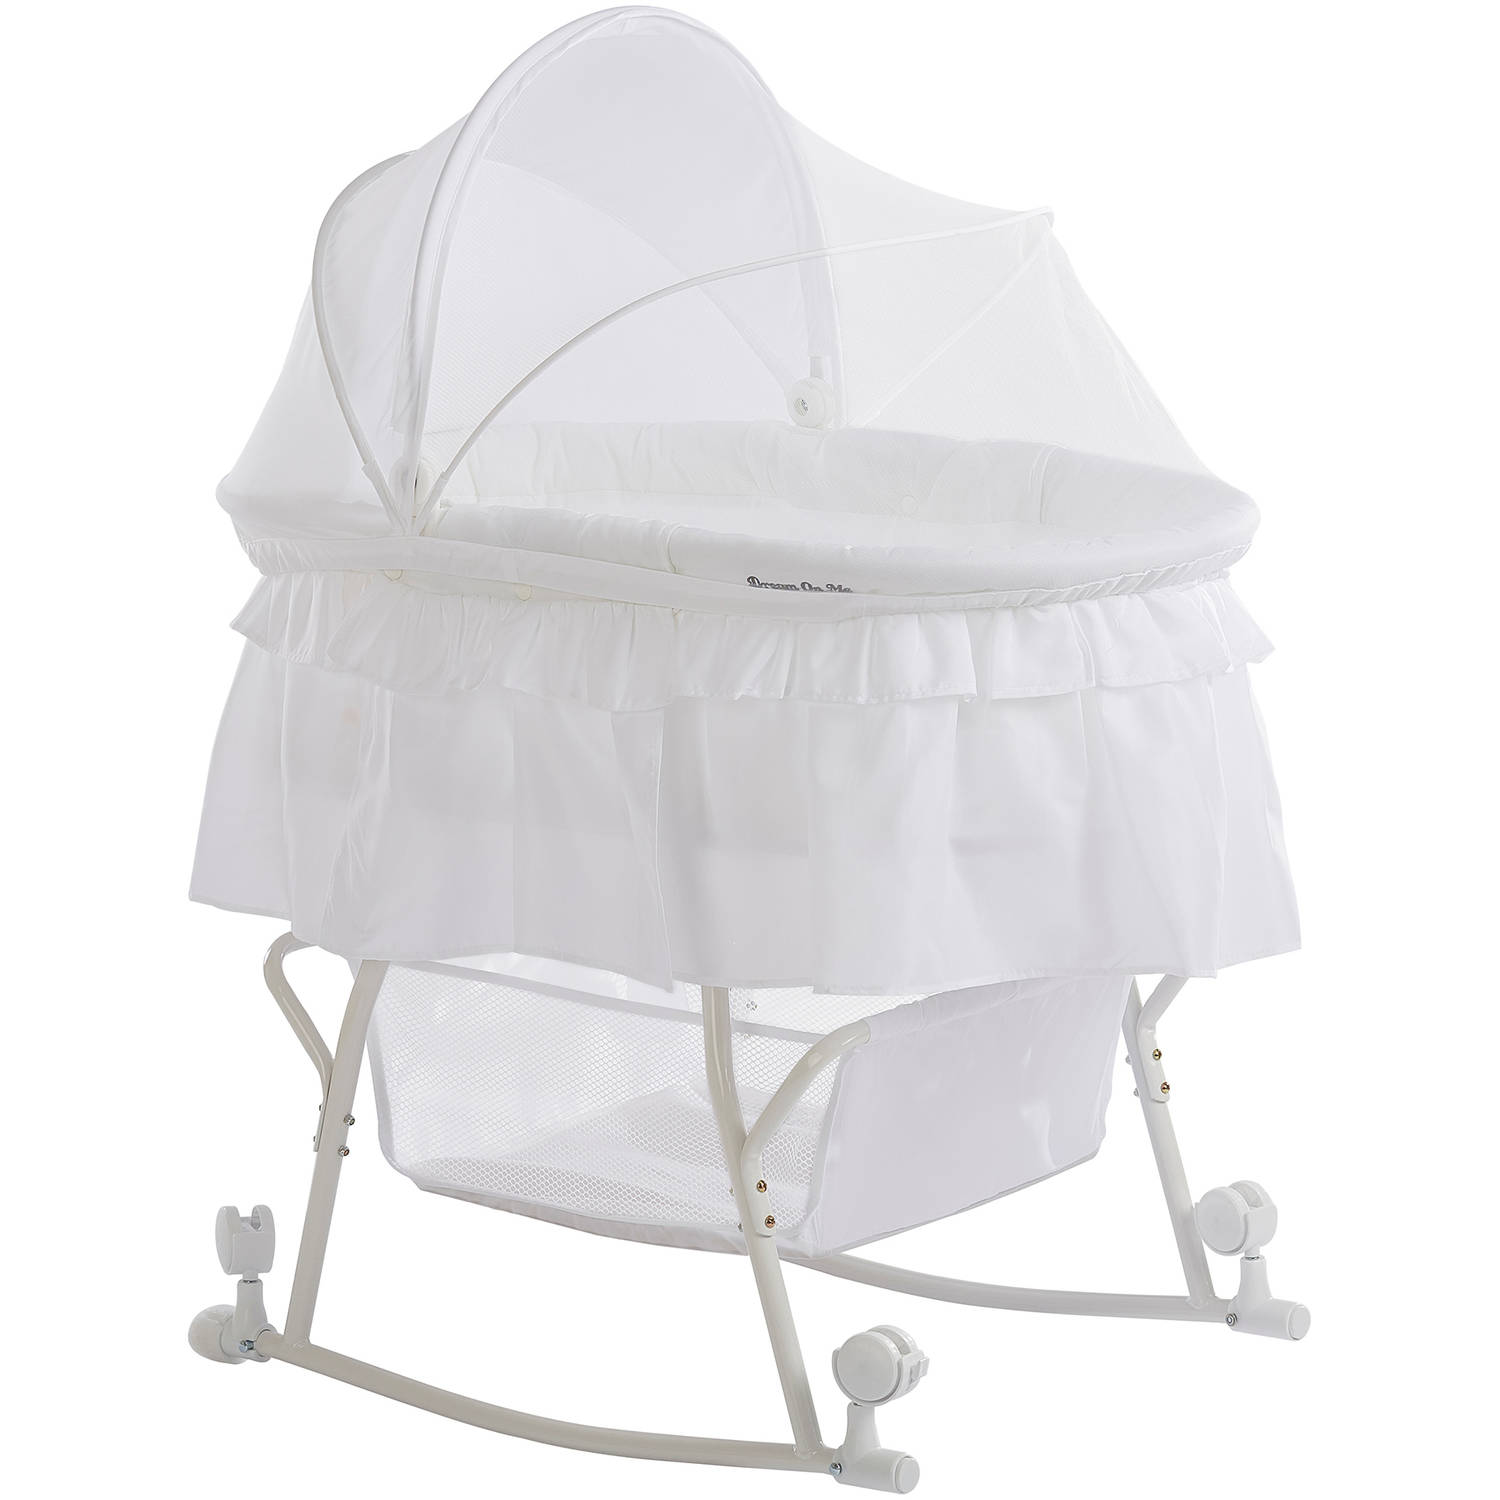 Black Dream On Me Lacy Portable 2-in-1 Bassinet /& Cradle